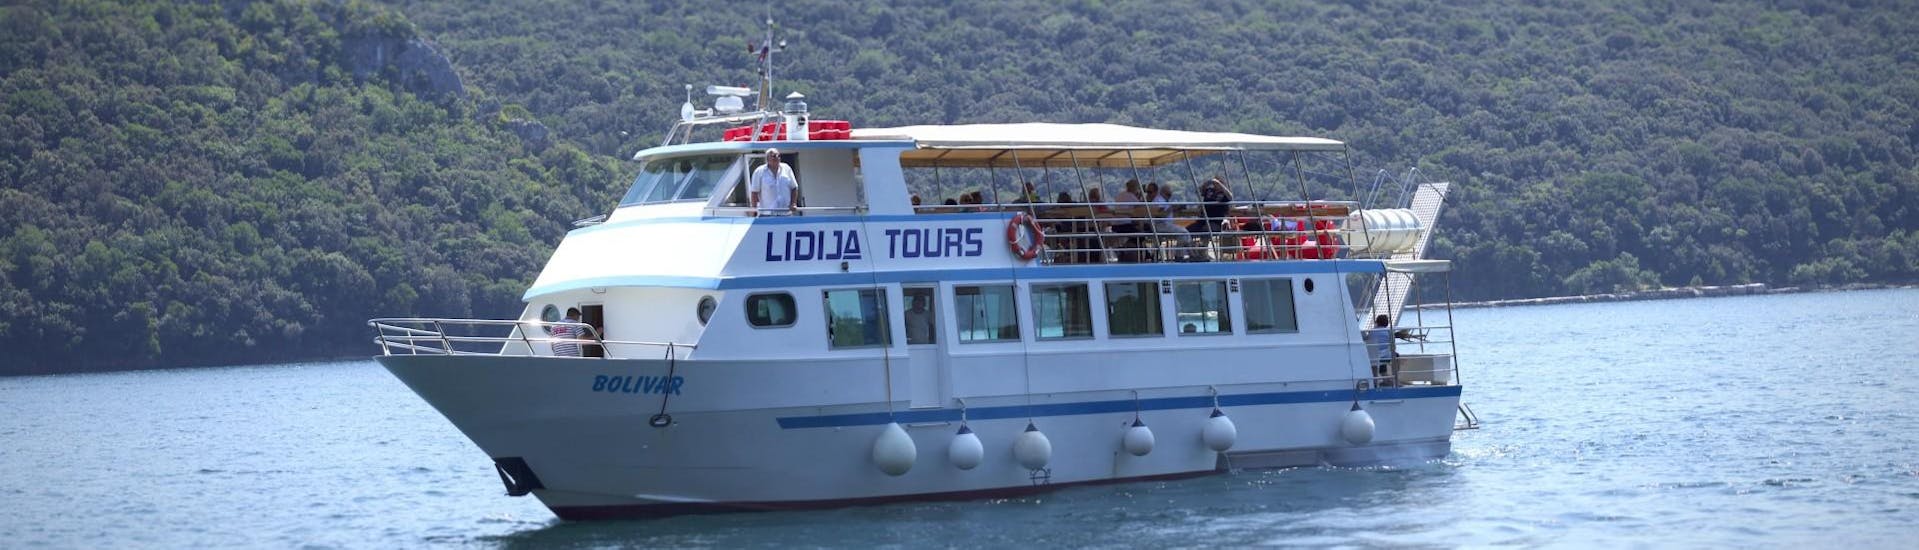 The boat used for Tours in Vrsar with Lidija Tours.